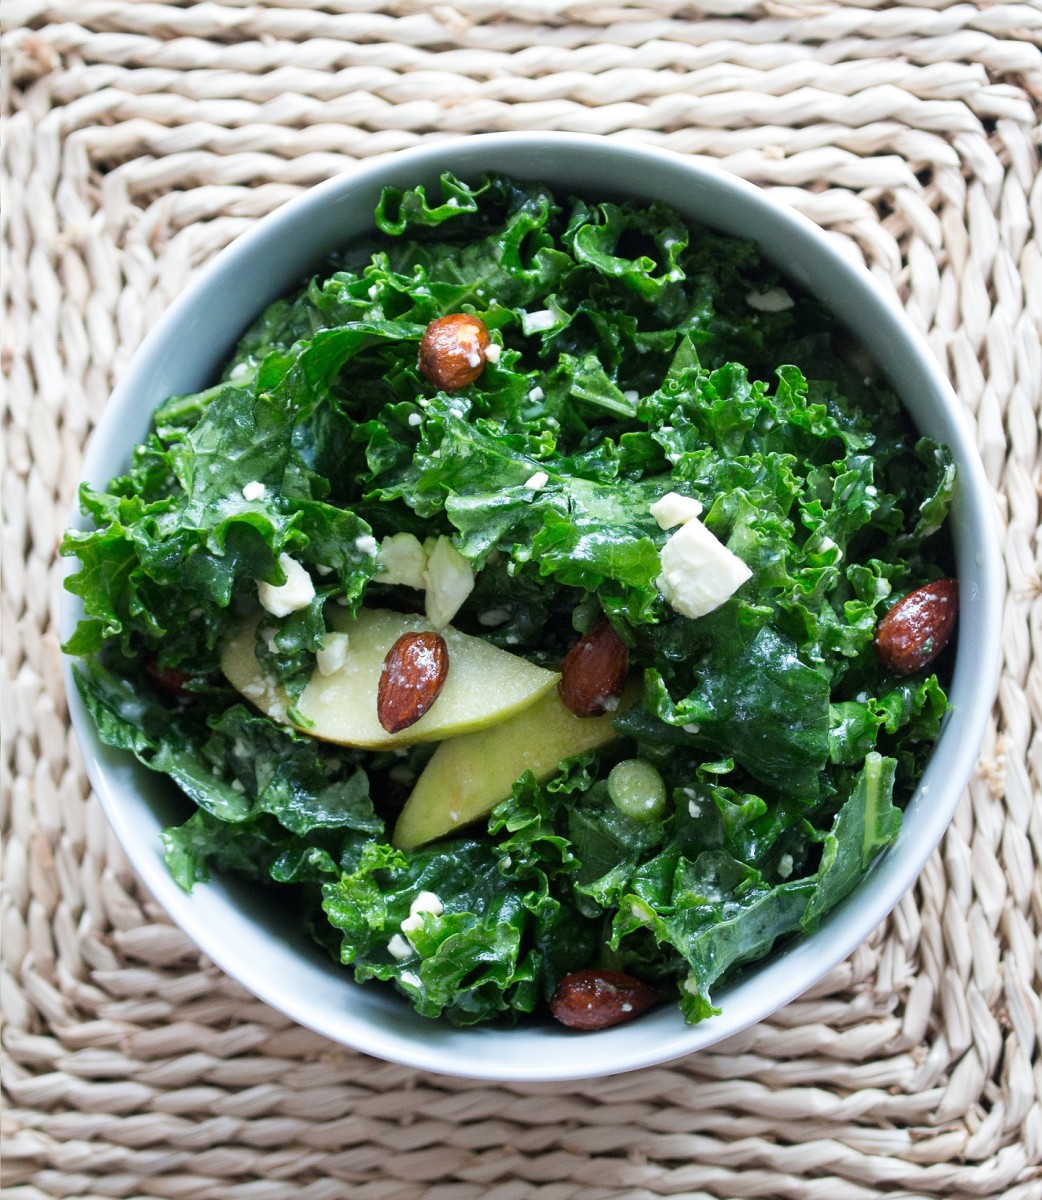 KALE SALAD WITH CANDIED ALMONDS, APPLES AND MAPLE DRESSING